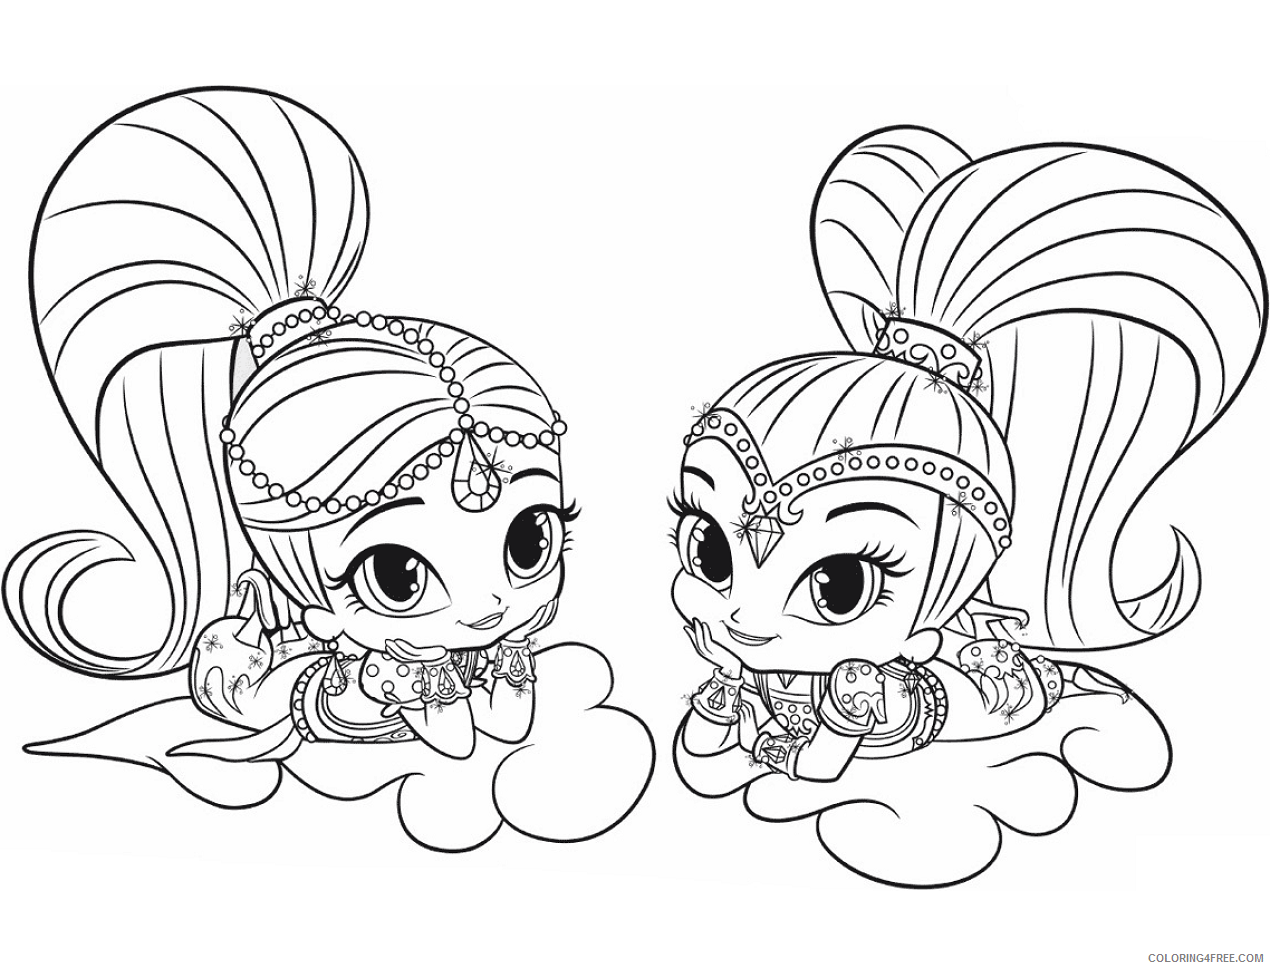 Shimmer and Shine Coloring Pages shimmer_and_shine_on_cloud Printable 2021 5343 Coloring4free